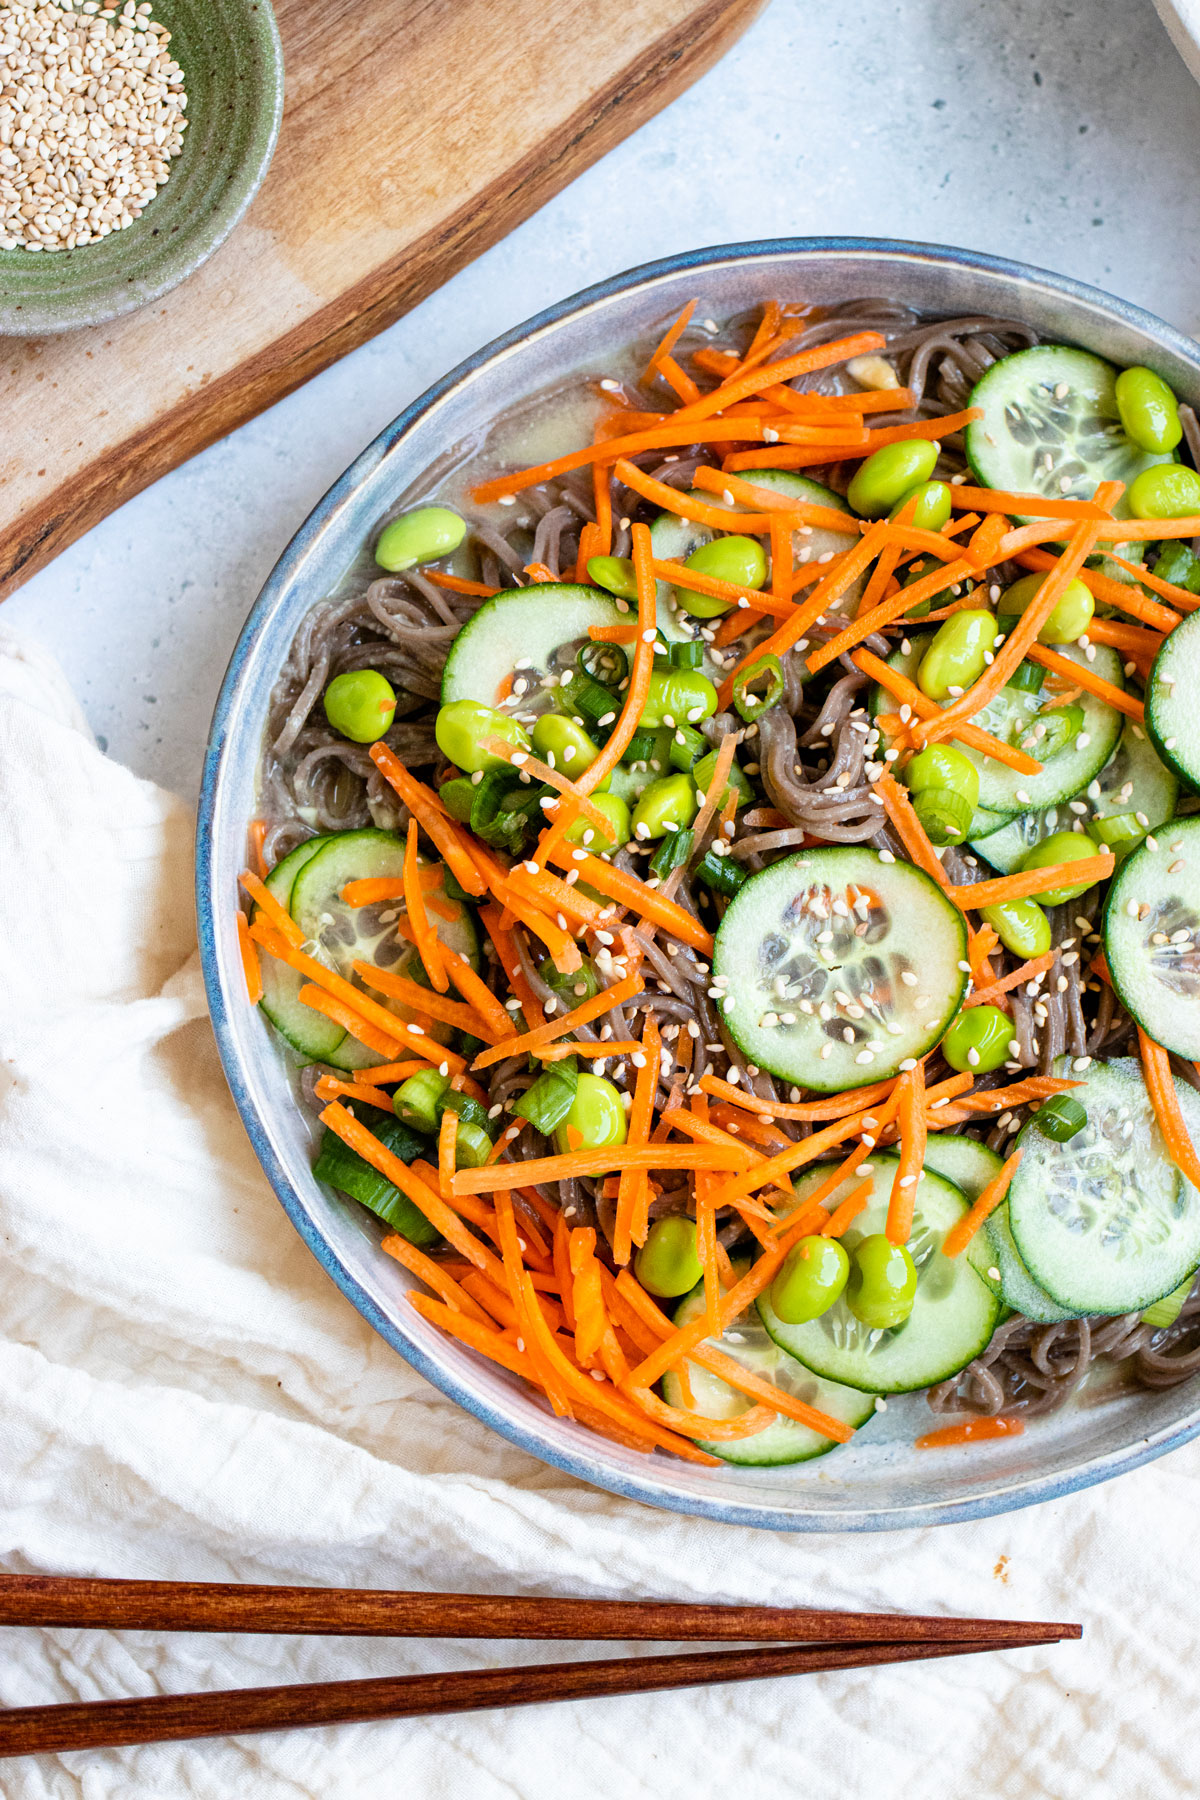 Miso sesame soba noodles topped with cucumber, carrots, and edamame.